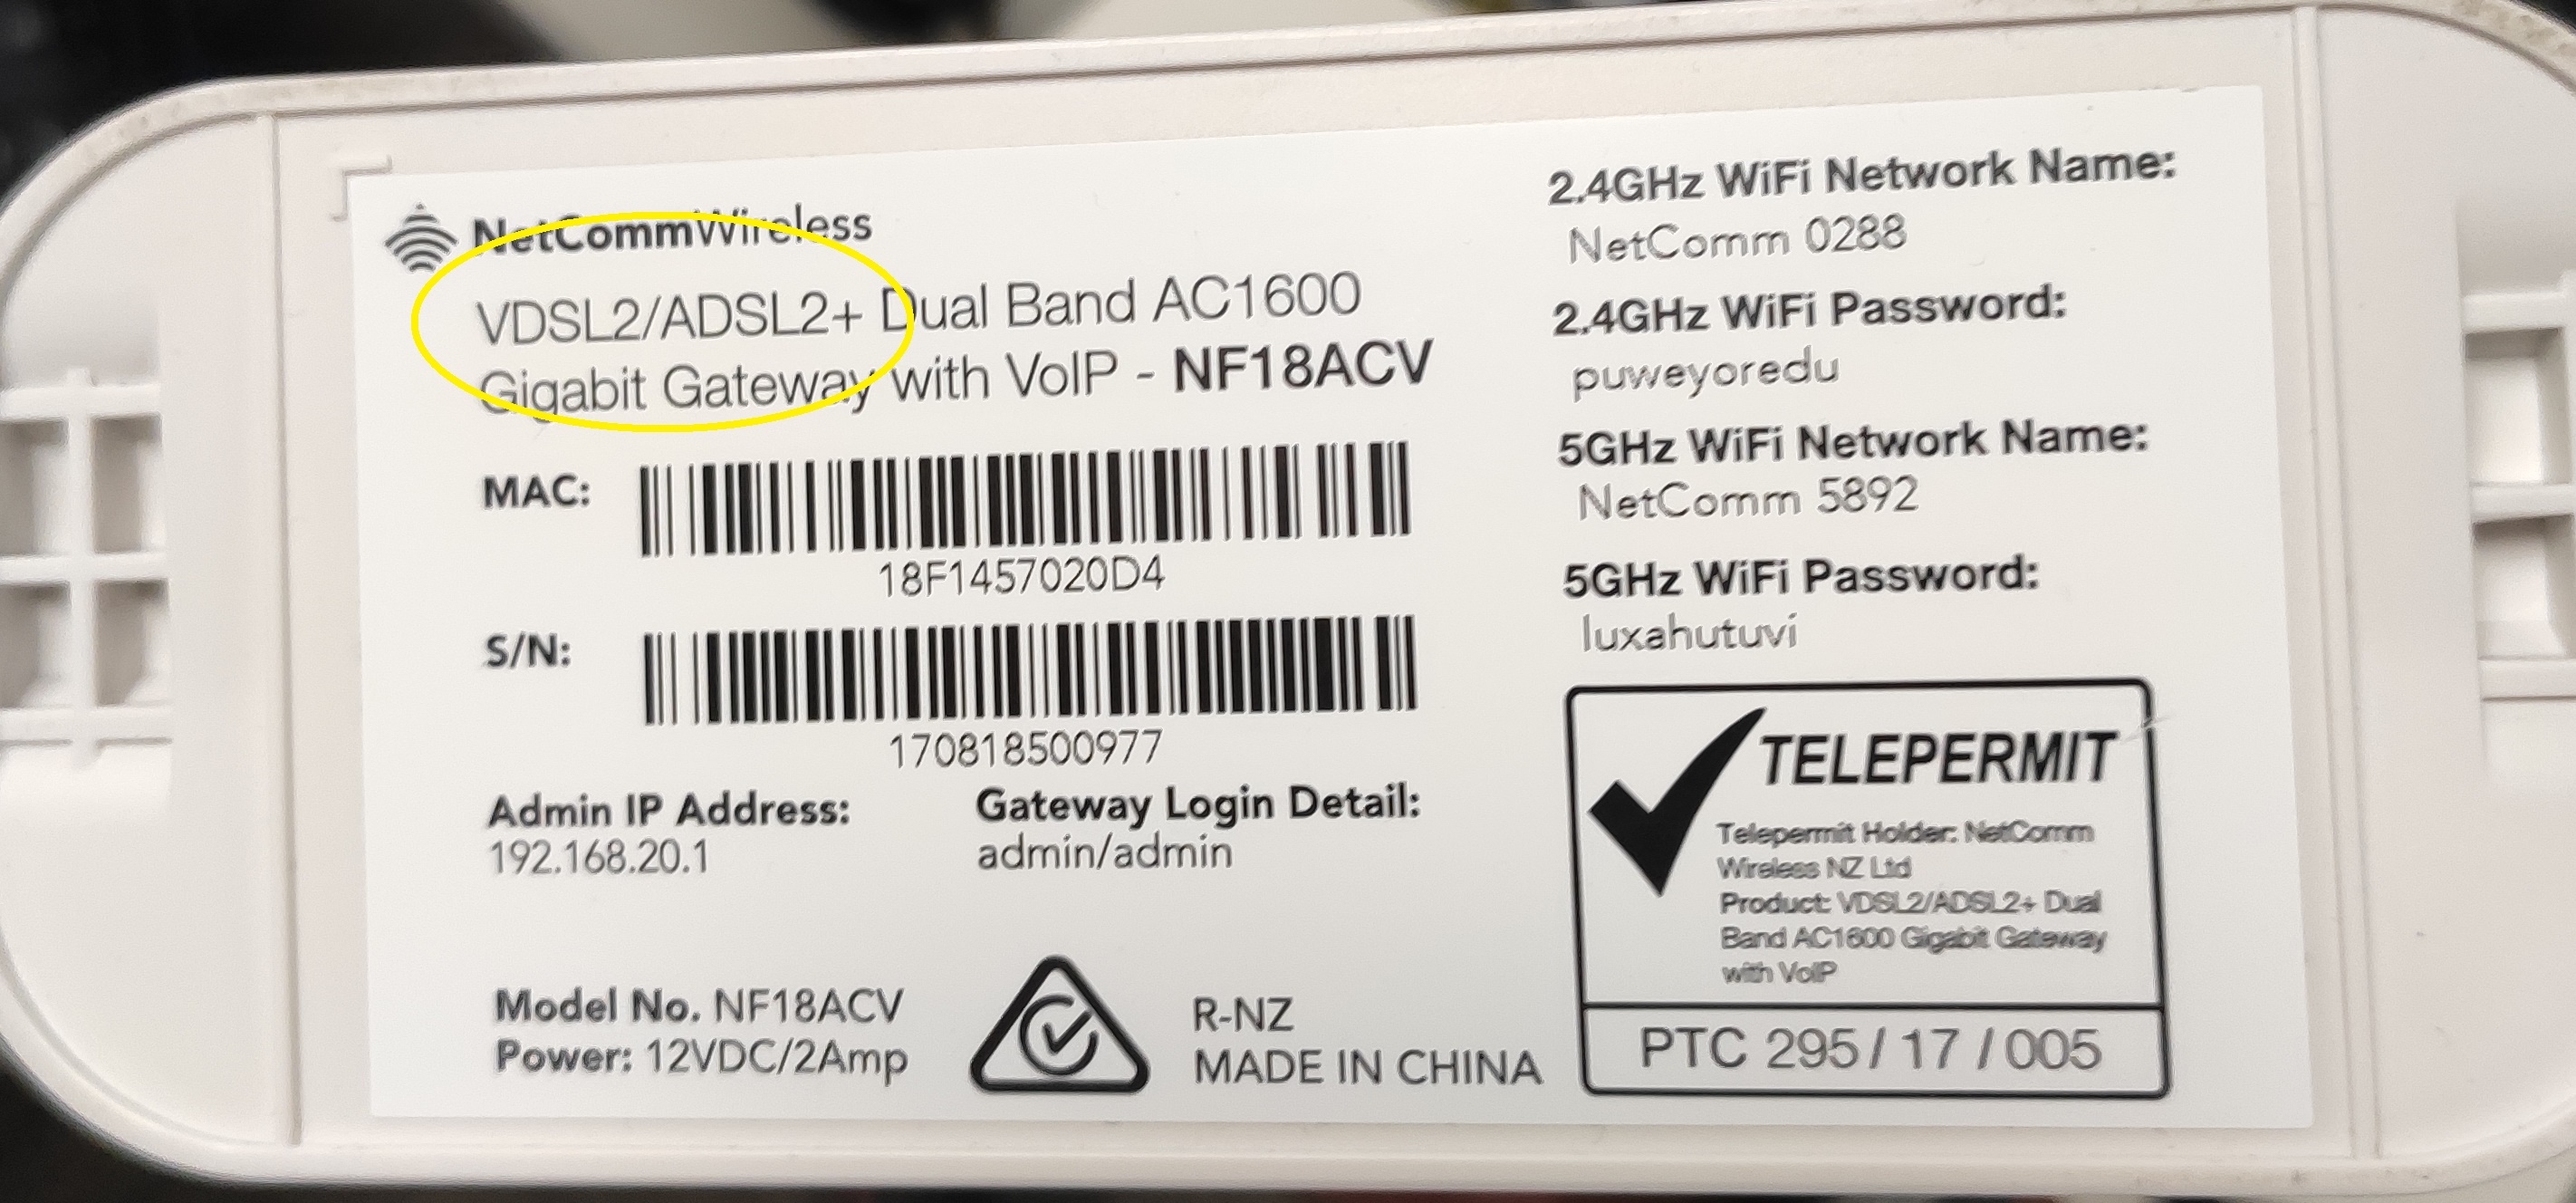 This router’s label indicates it is compatible with both VDSL (for nbn FttN/B) and older ADSL internet connections.